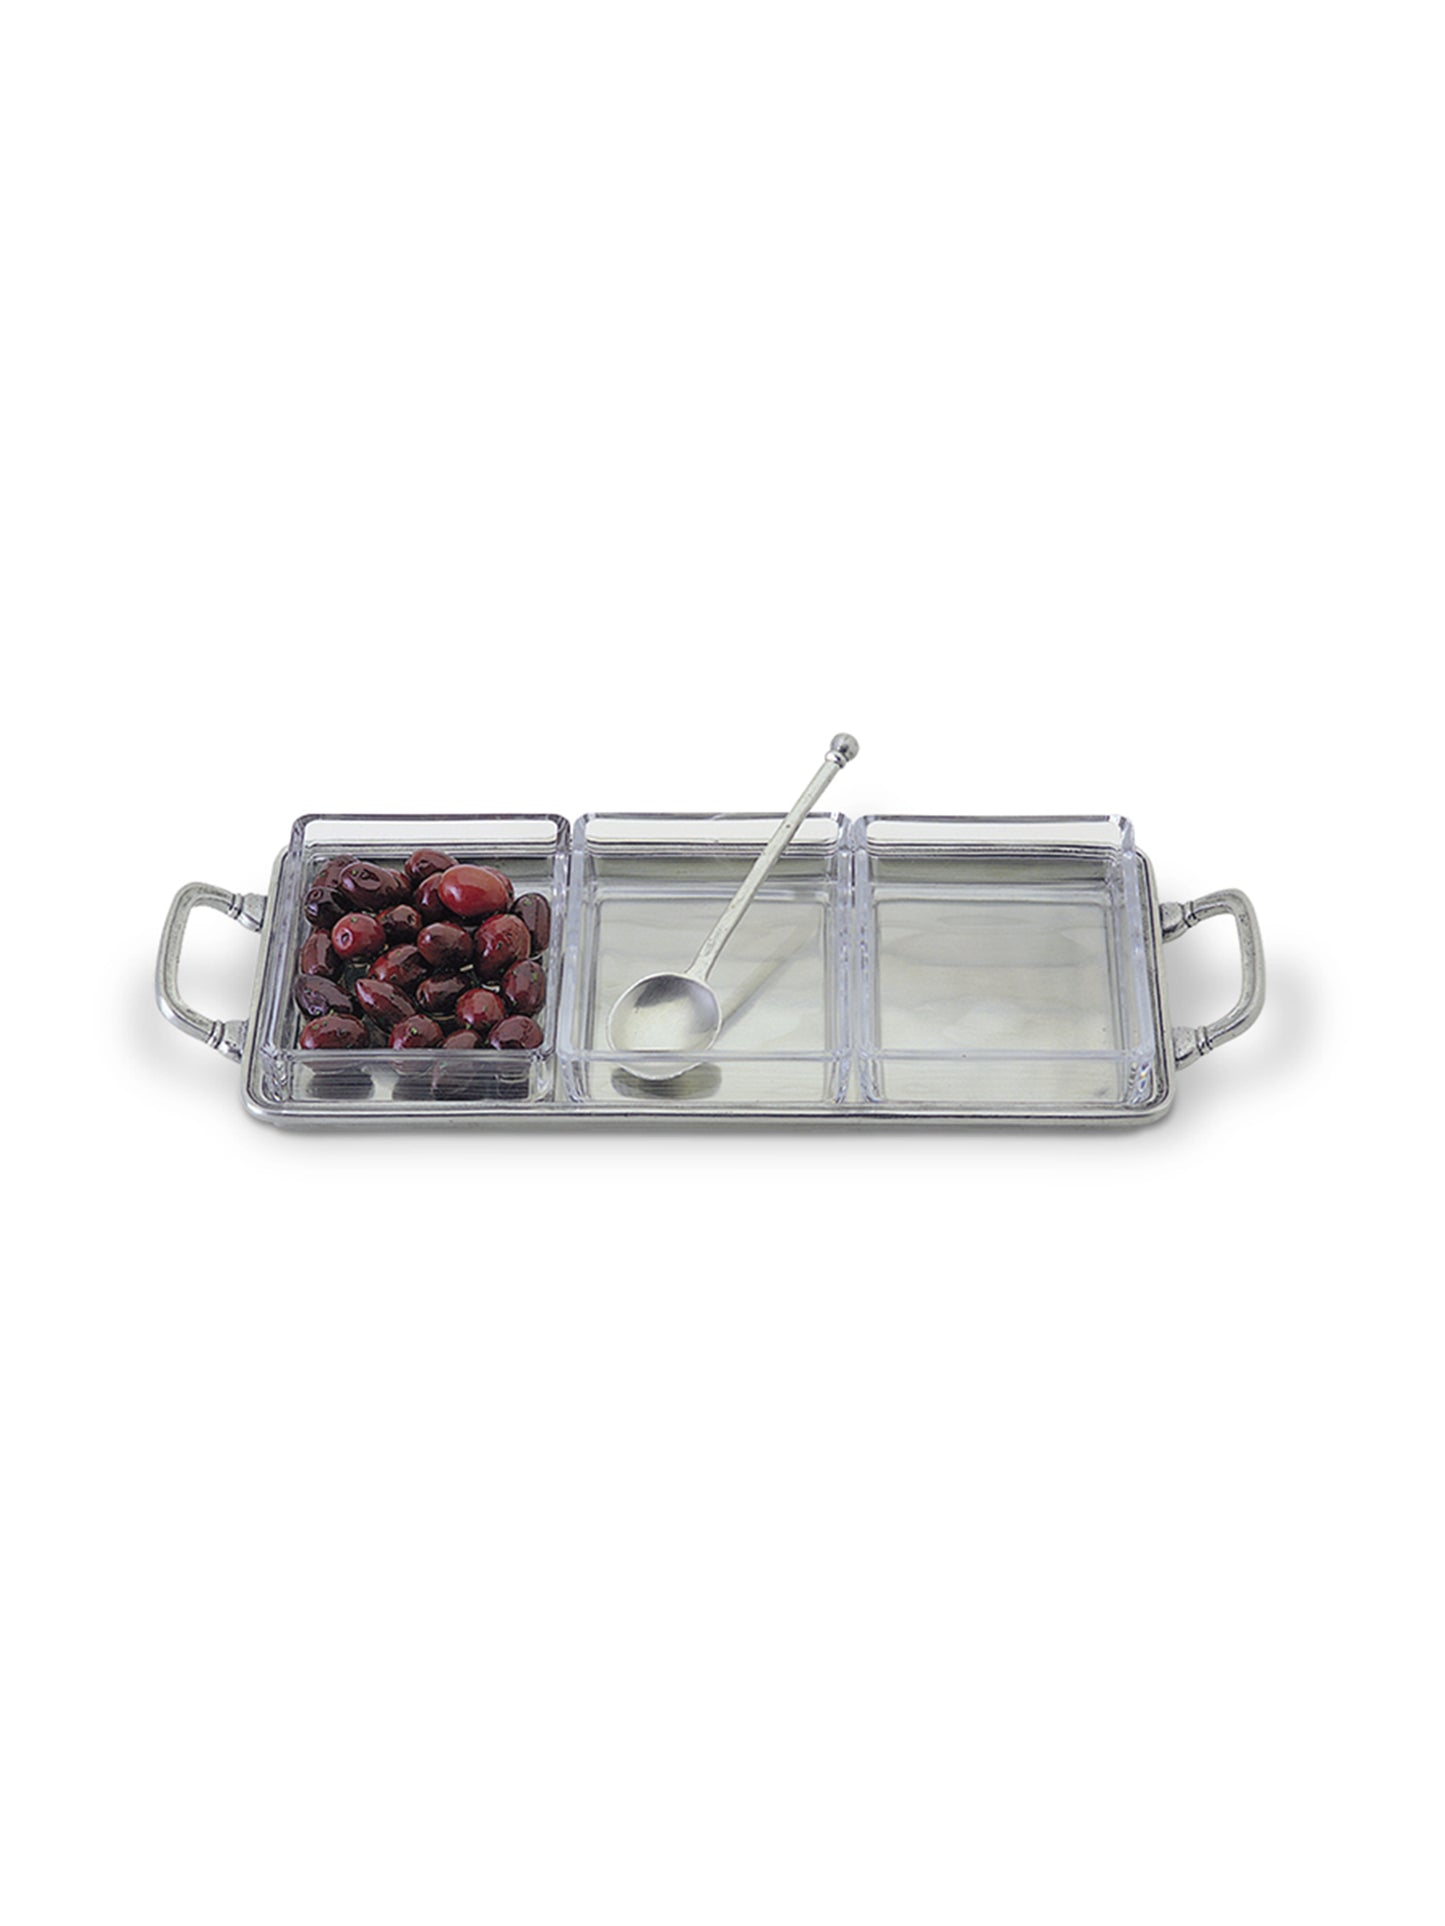 MATCH Pewter Crudité Tray with Crystal Inserts & Handles Weston Table